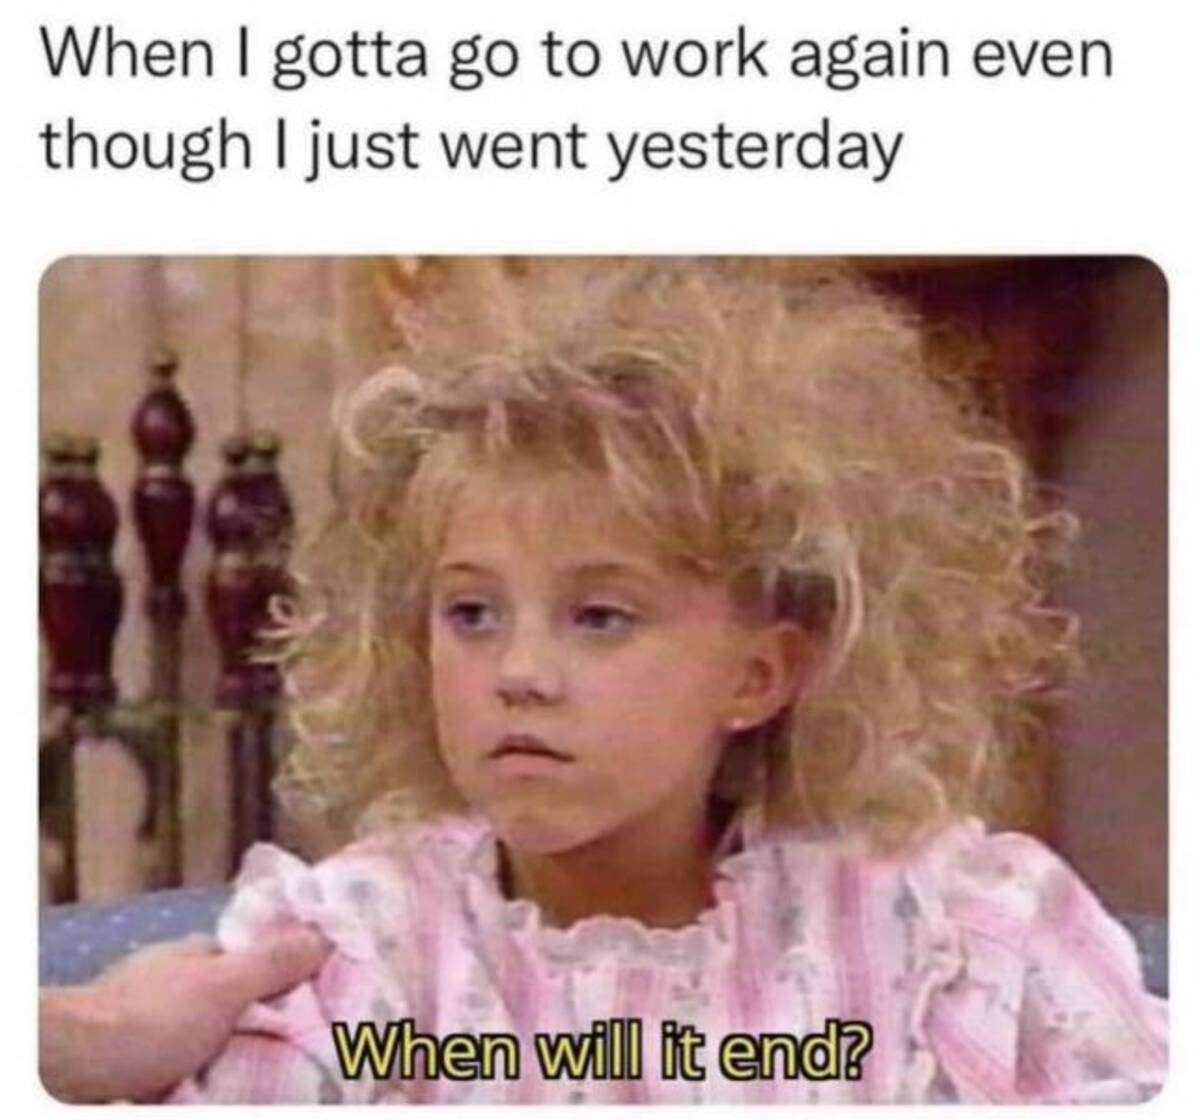 will it end meme - When I gotta go to work again even though I just went yesterday When will it end?